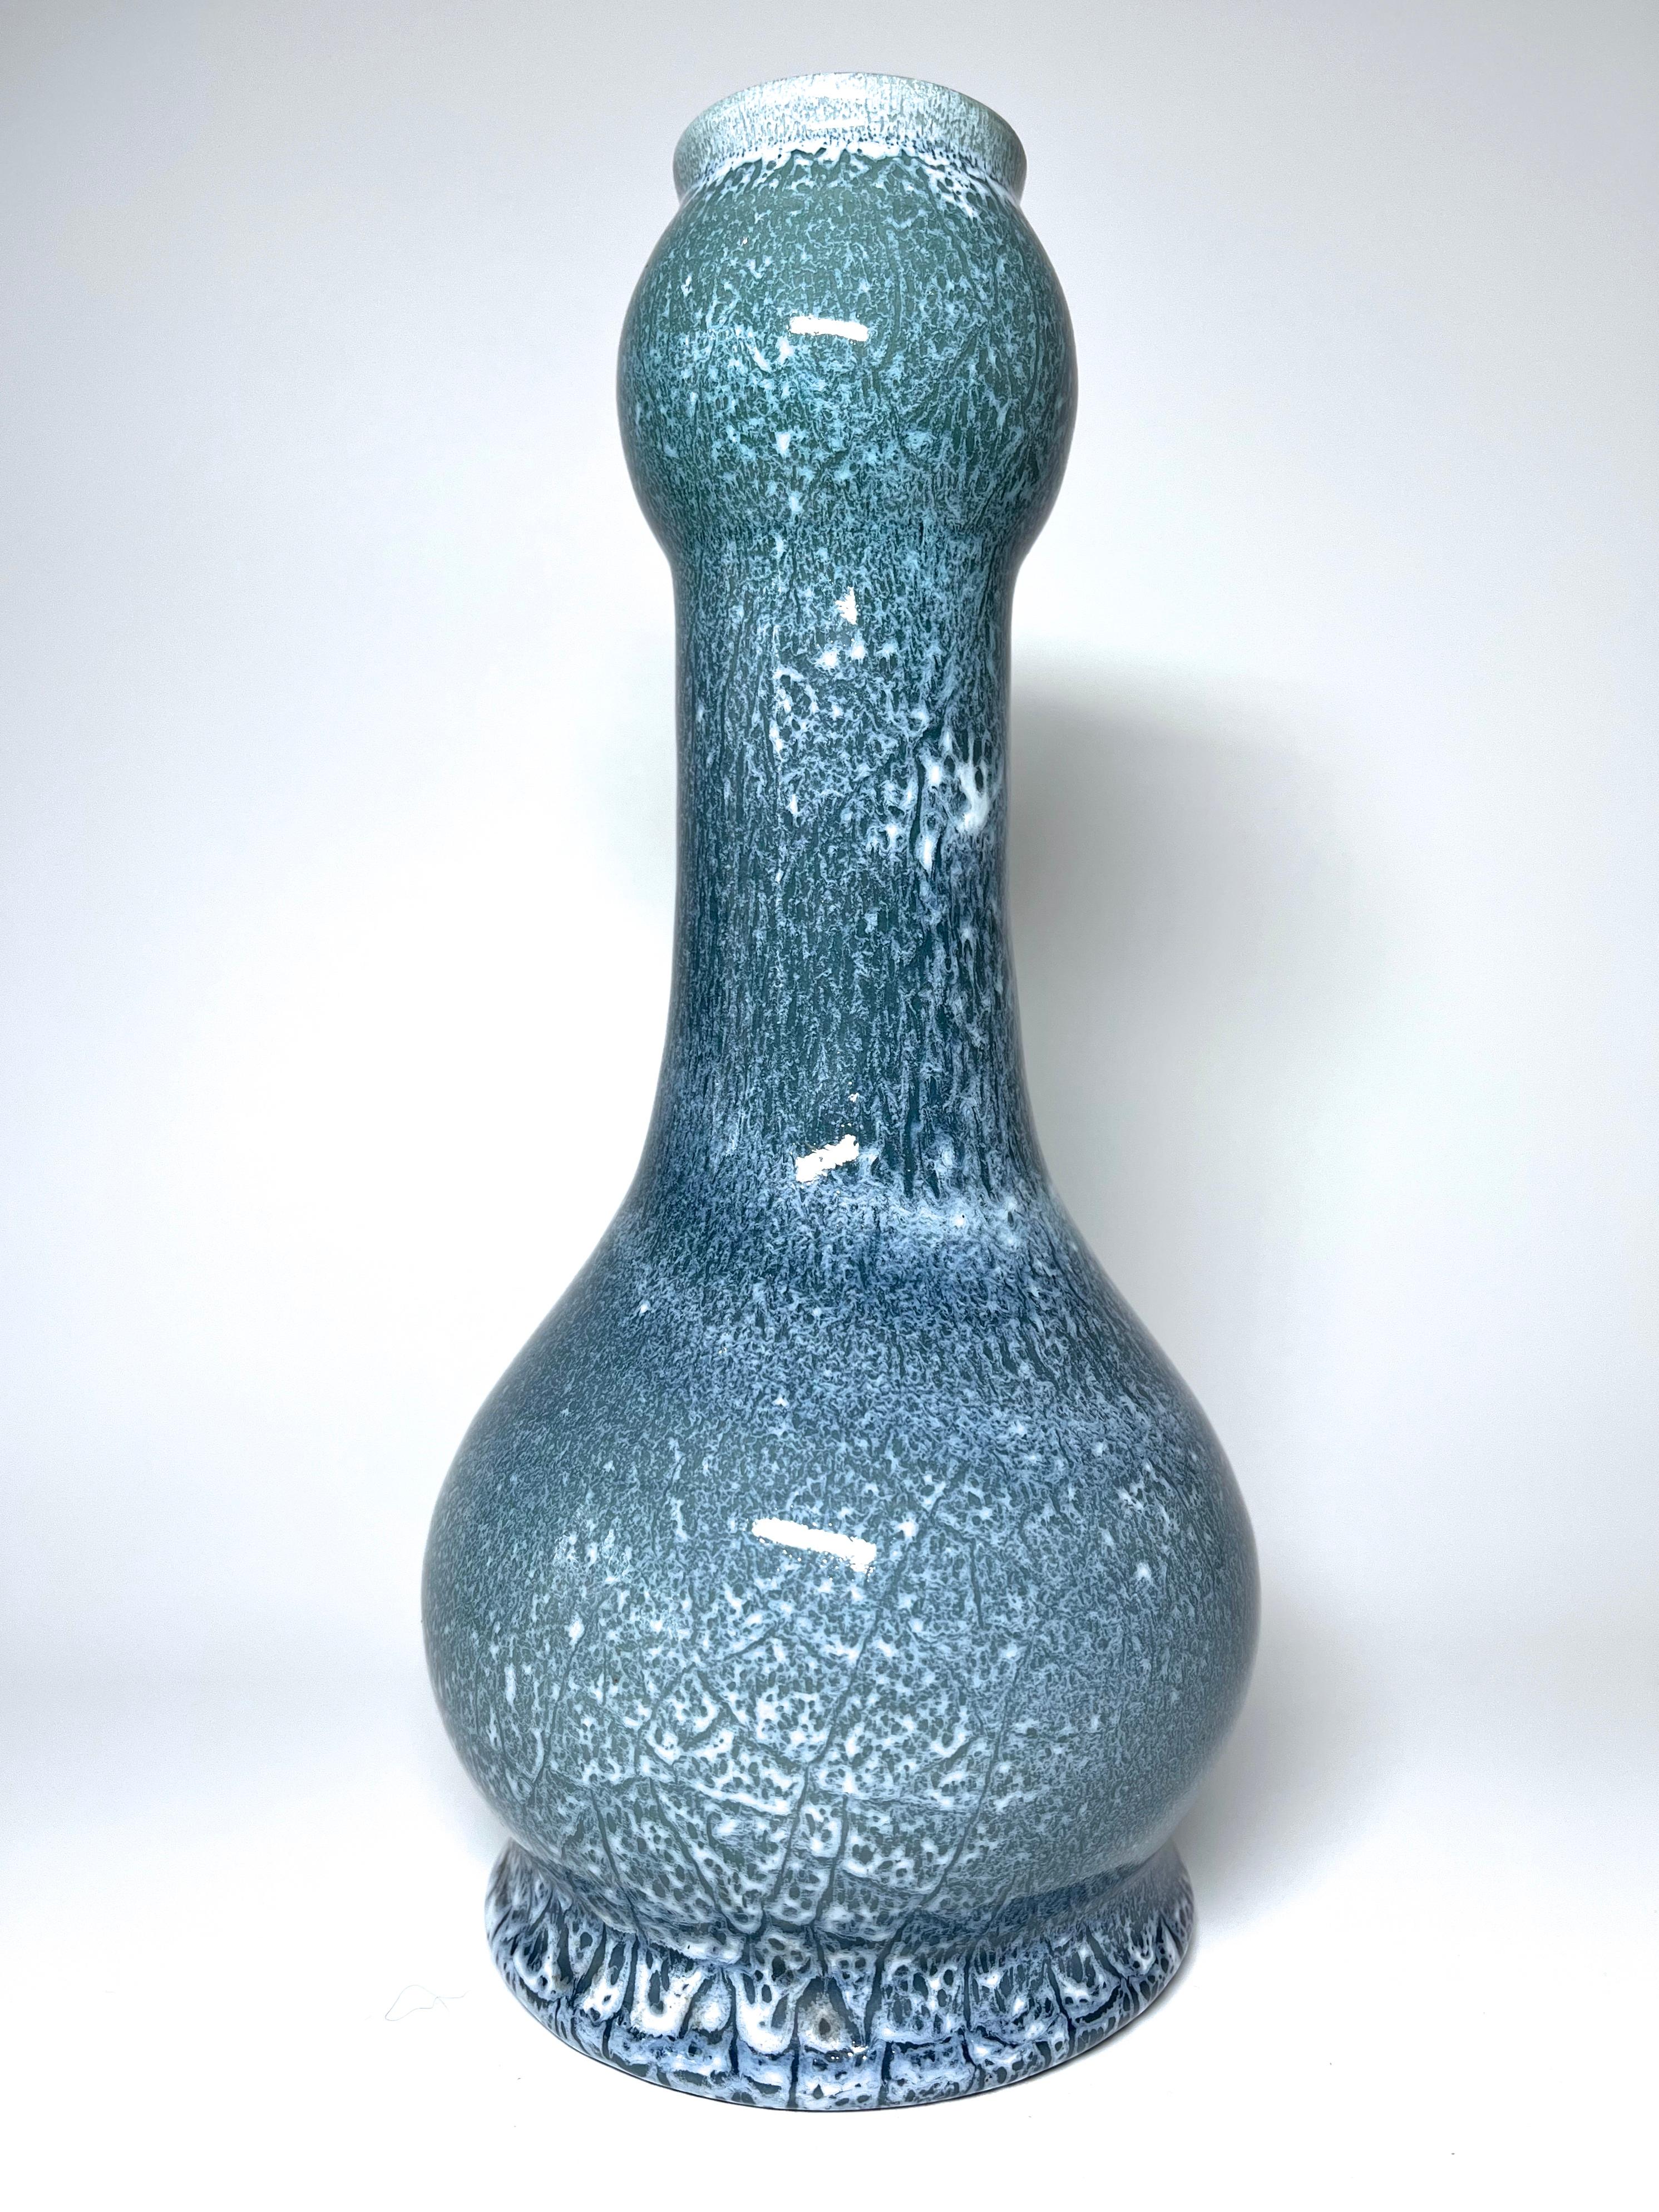 Mid-20th Century Superbly Crafted, Hand Thrown Ceramic Vase From Accolay, France 1960's For Sale